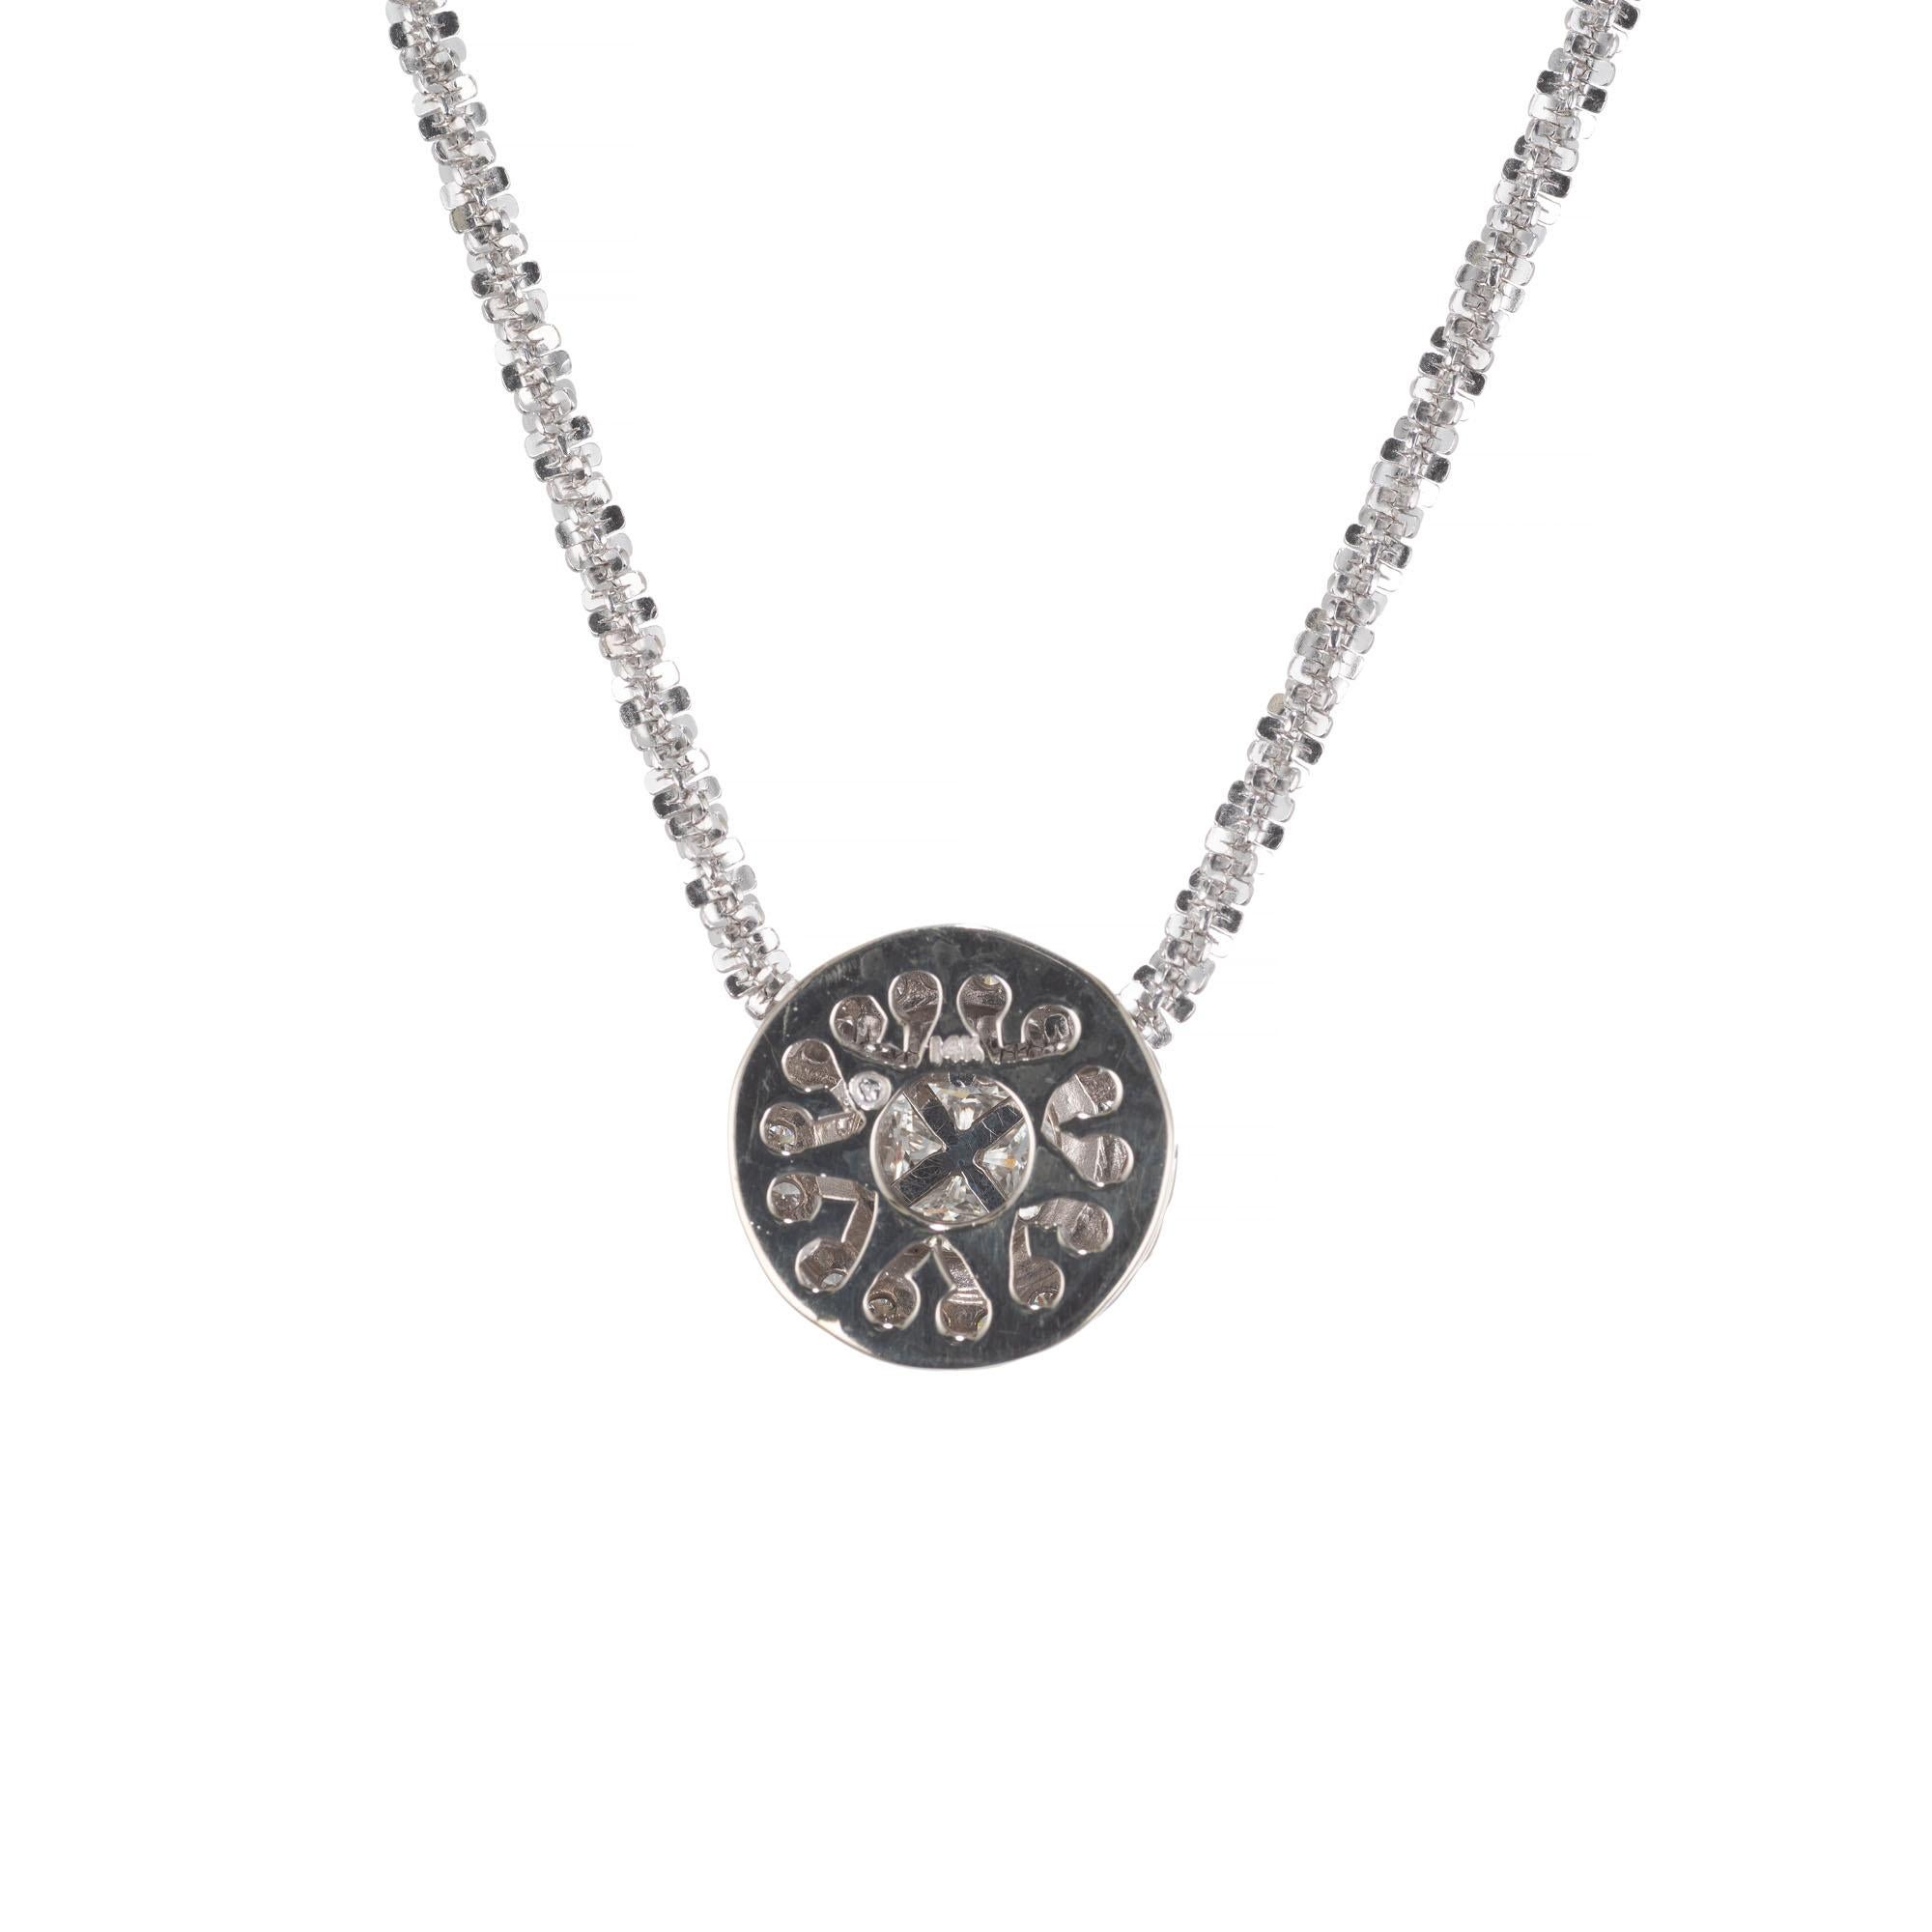 Four trilliant diamond clustered pendant necklace. Center diamonds surrounded with a halo of round brilliant diamonds. Set in 14k white gold on a 14k white gold chain 18 inch chain. 

4 triangular brilliant cut diamonds G-H VS, approx. .55cts
21